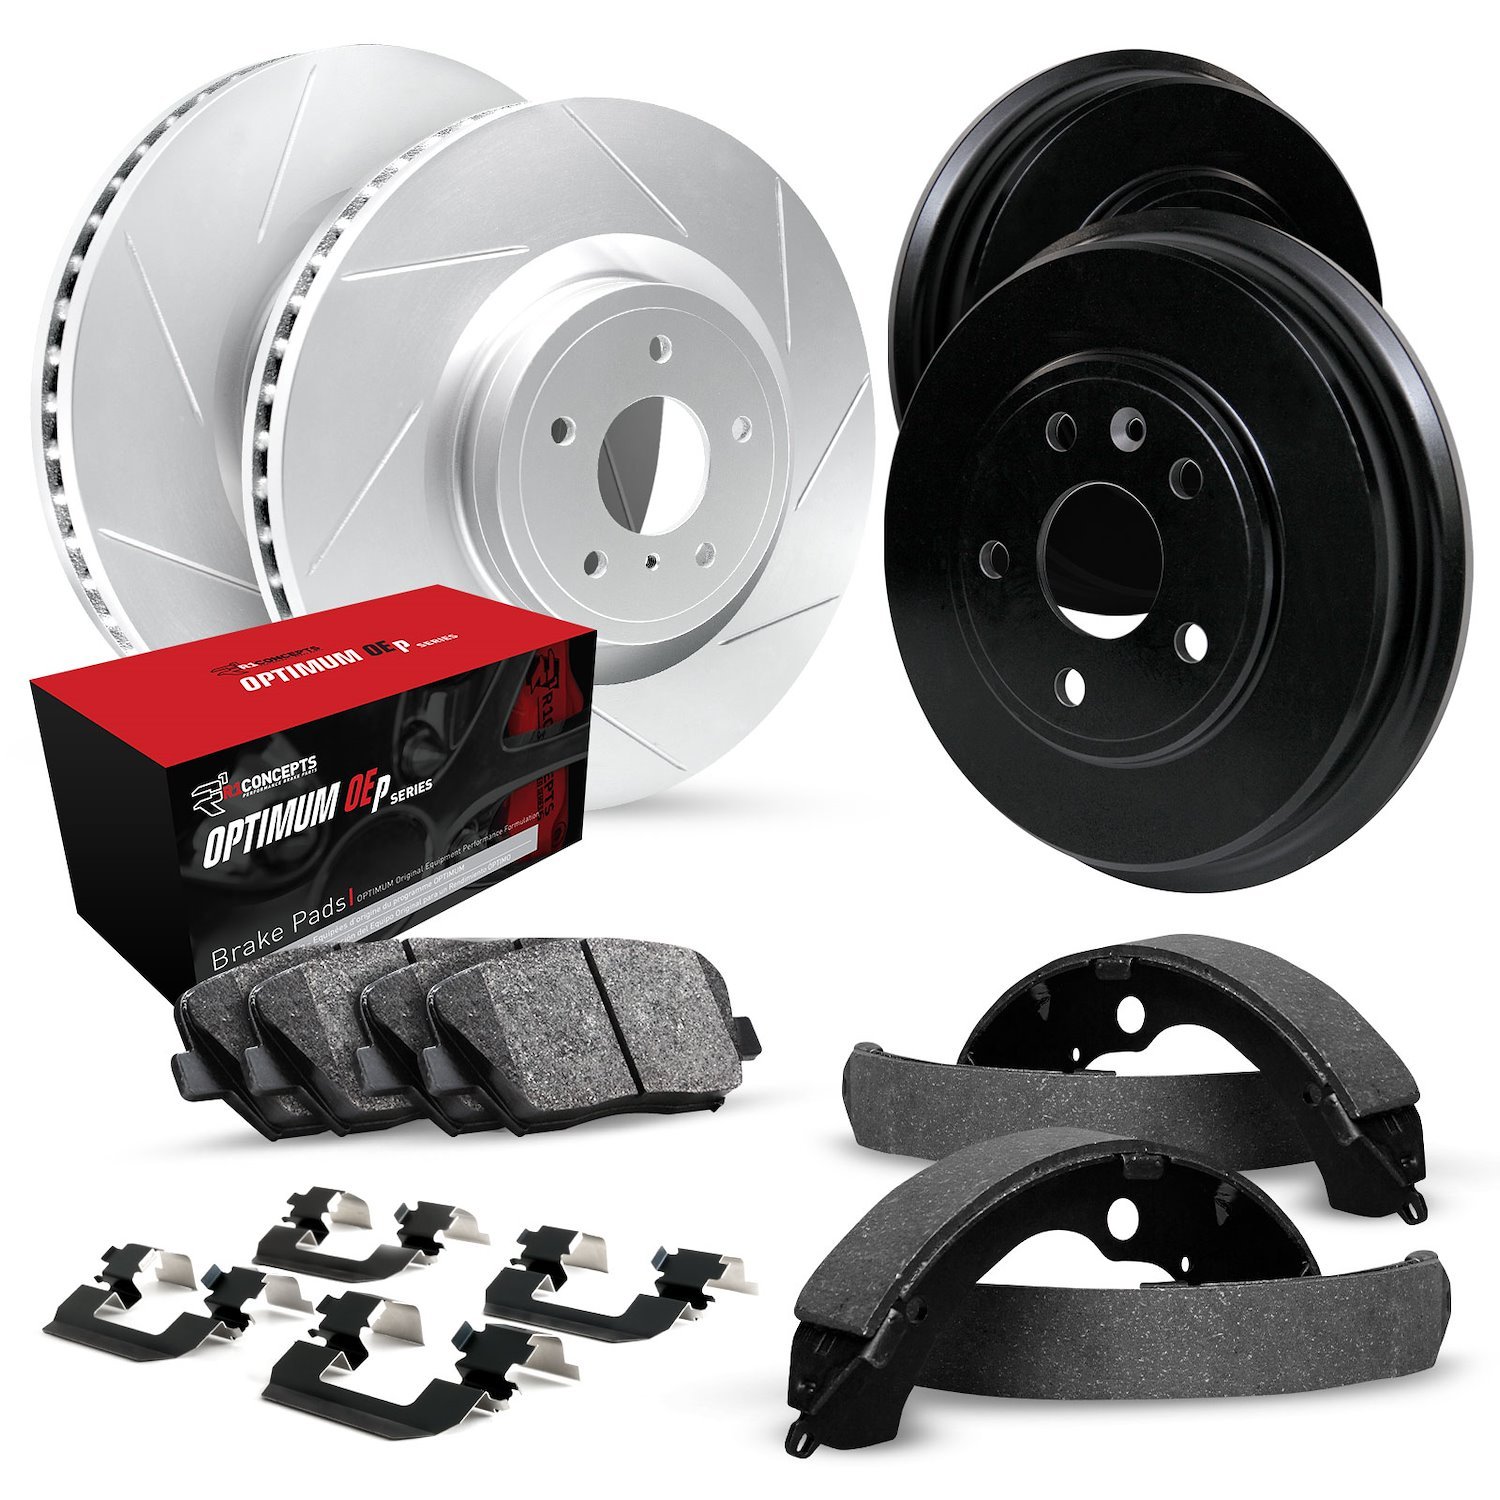 GEO-Carbon Slotted Brake Rotor & Drum Set w/Optimum OE Pads, Shoes, & Hardware, 1999-2001 Ford/Lincoln/Mercury/Mazda